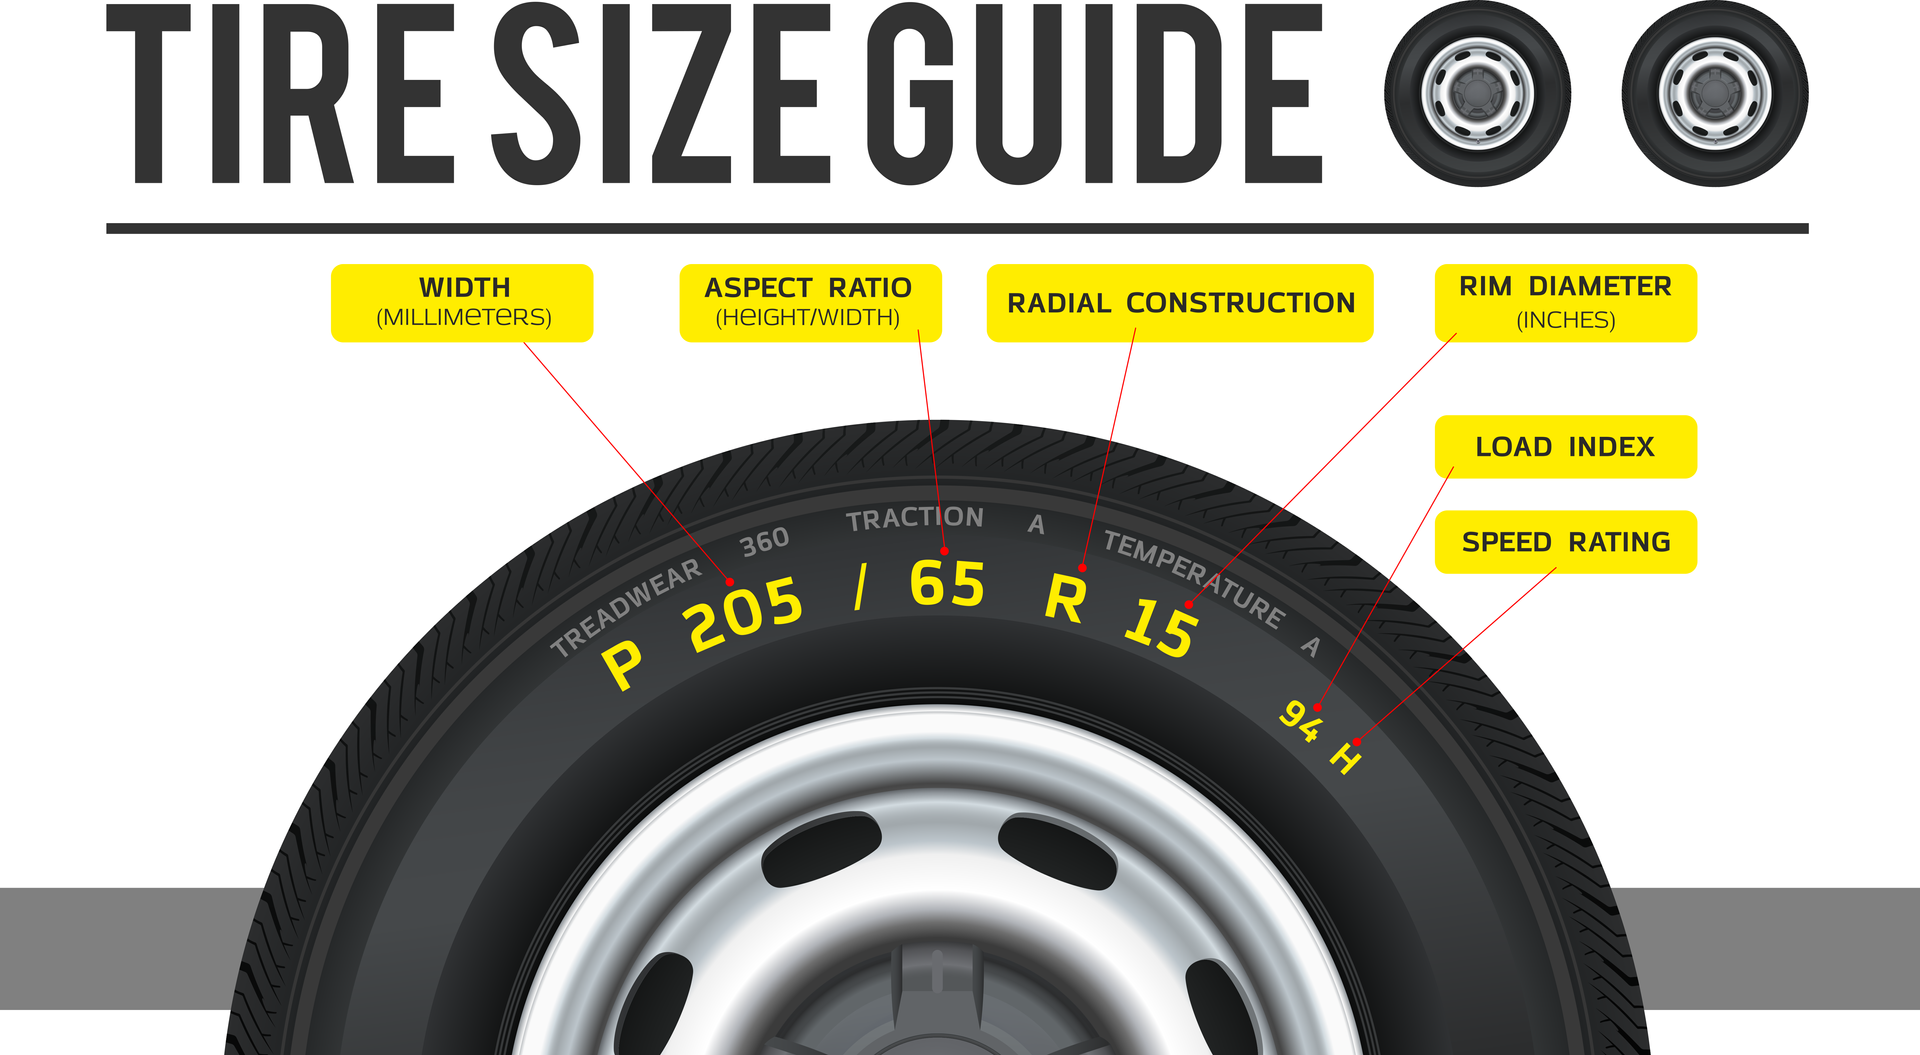 Tire Size Guide at The Wrench Connection in Orlando, FL